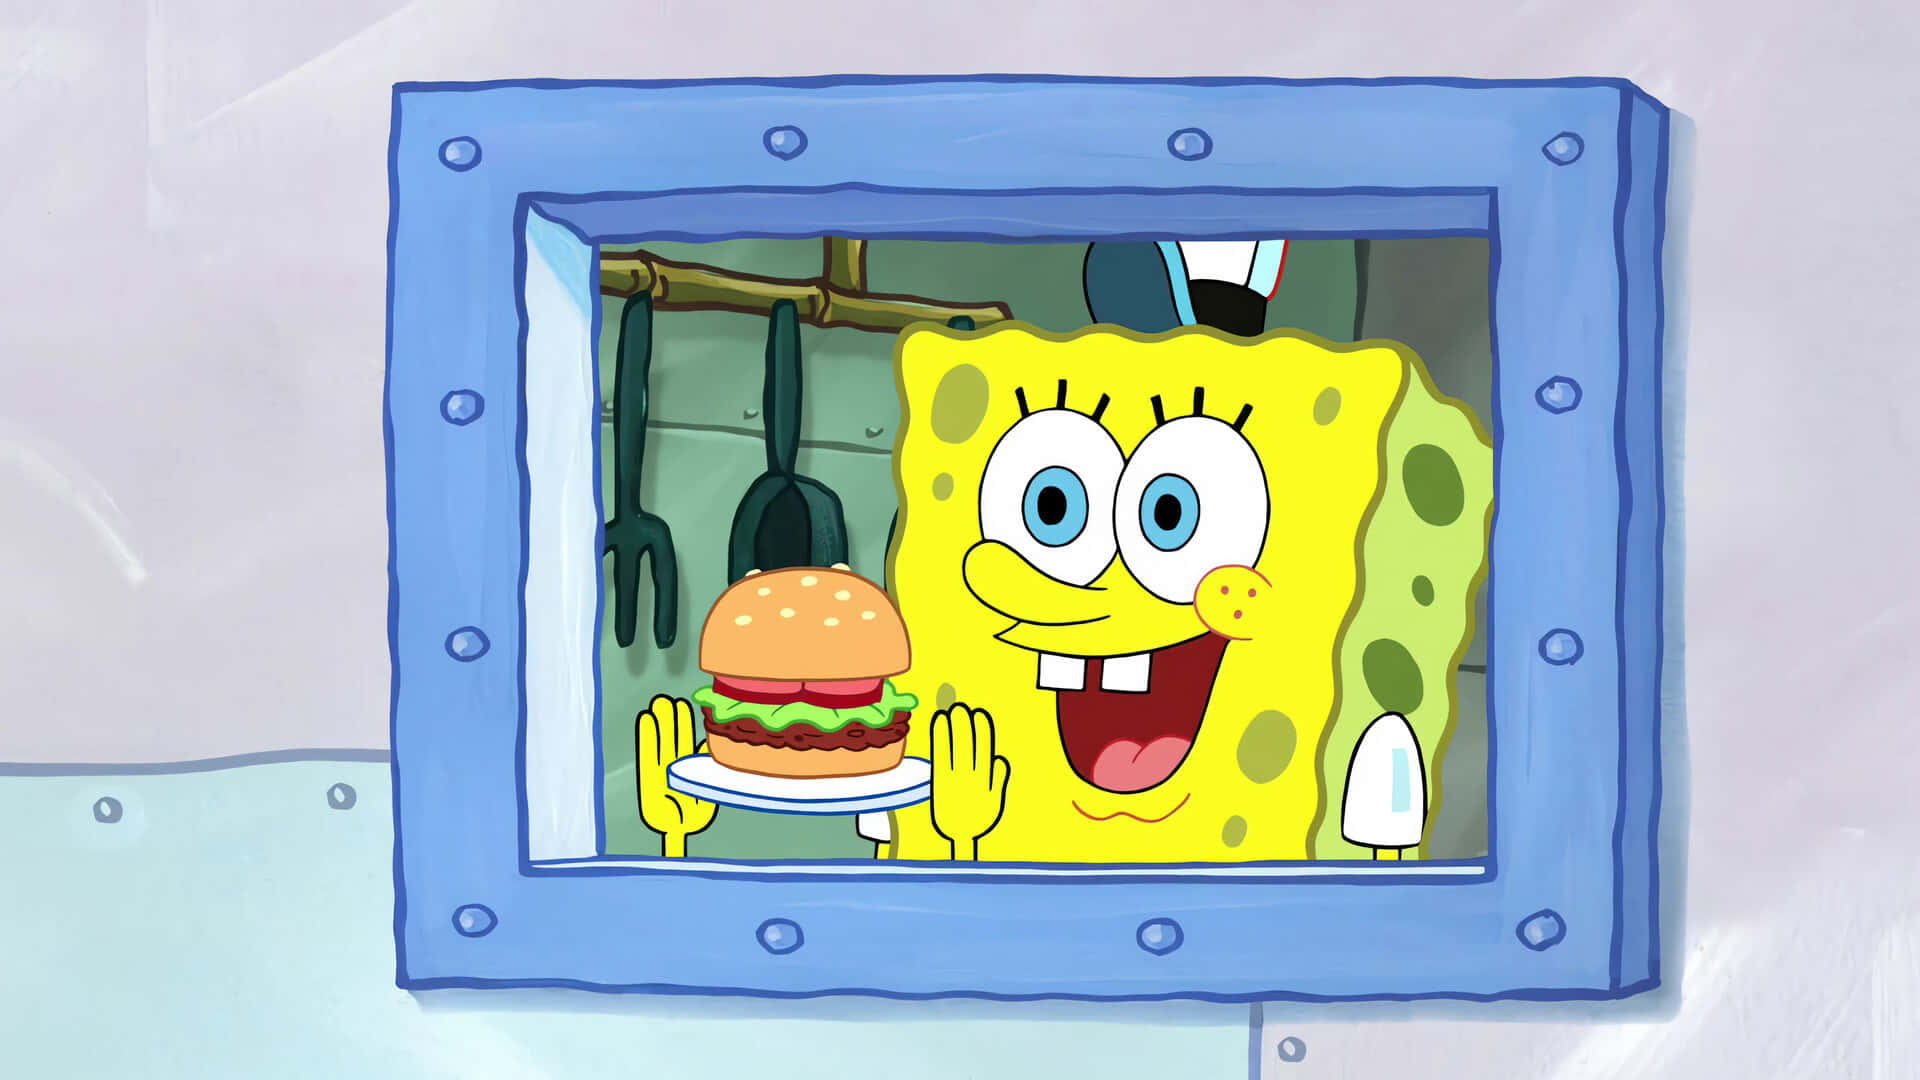 Juicy Krabby Patty on a bed of fresh lettuce and tomatoes Wallpaper